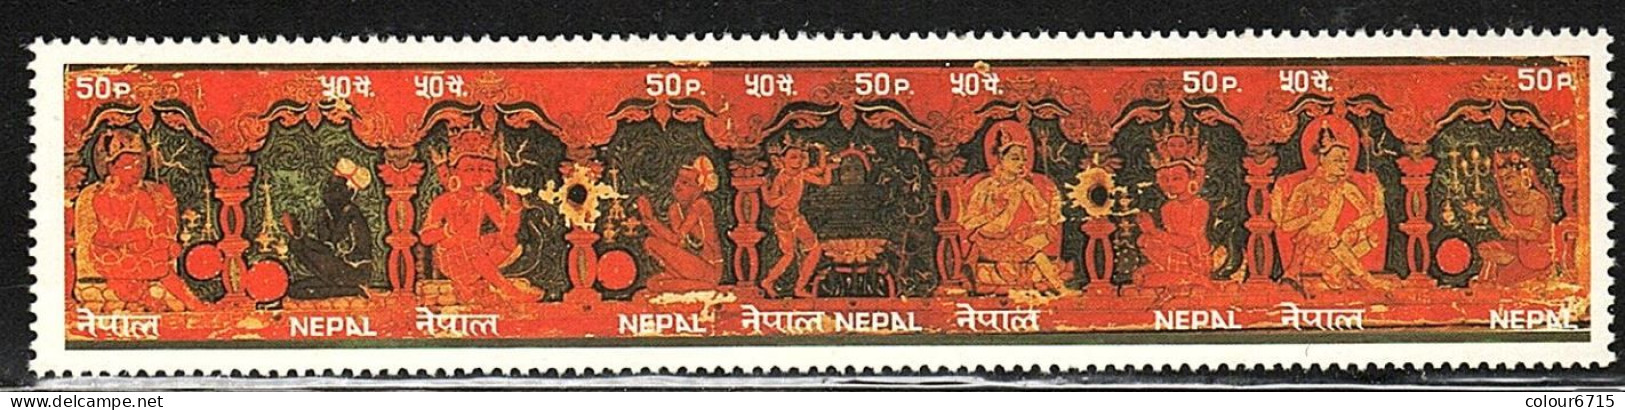 Nepal 1985 Traditional Painters Stamps 5v Imperf. MNH - Nepal